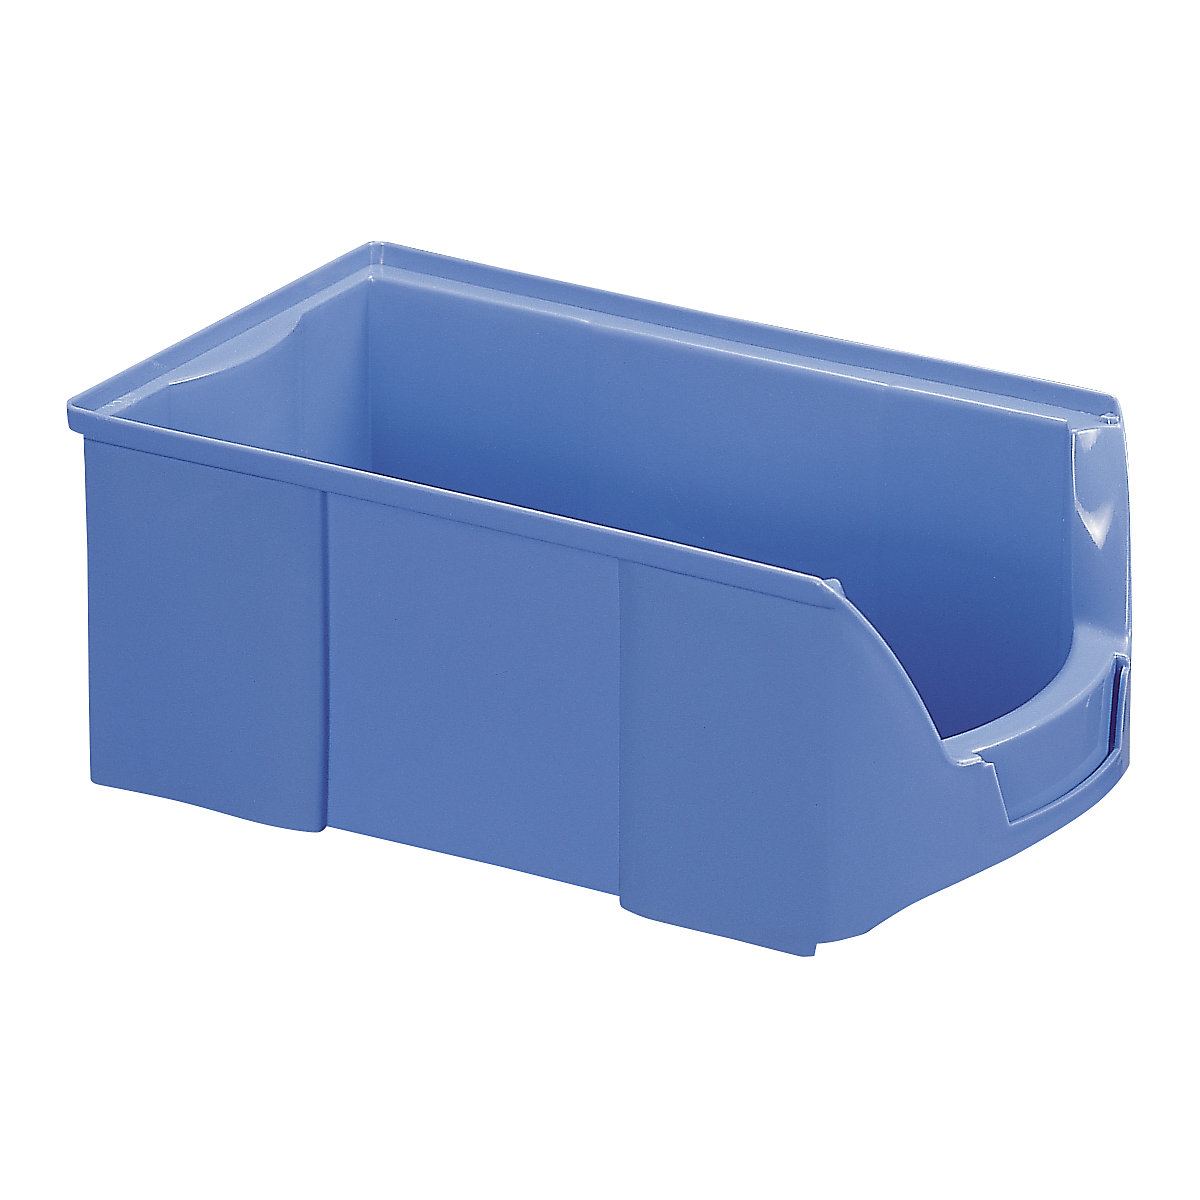 FUTURA open fronted storage bin made of polyethylene, LxWxH 360 x 208 x 147 mm, pack of 12, blue-18